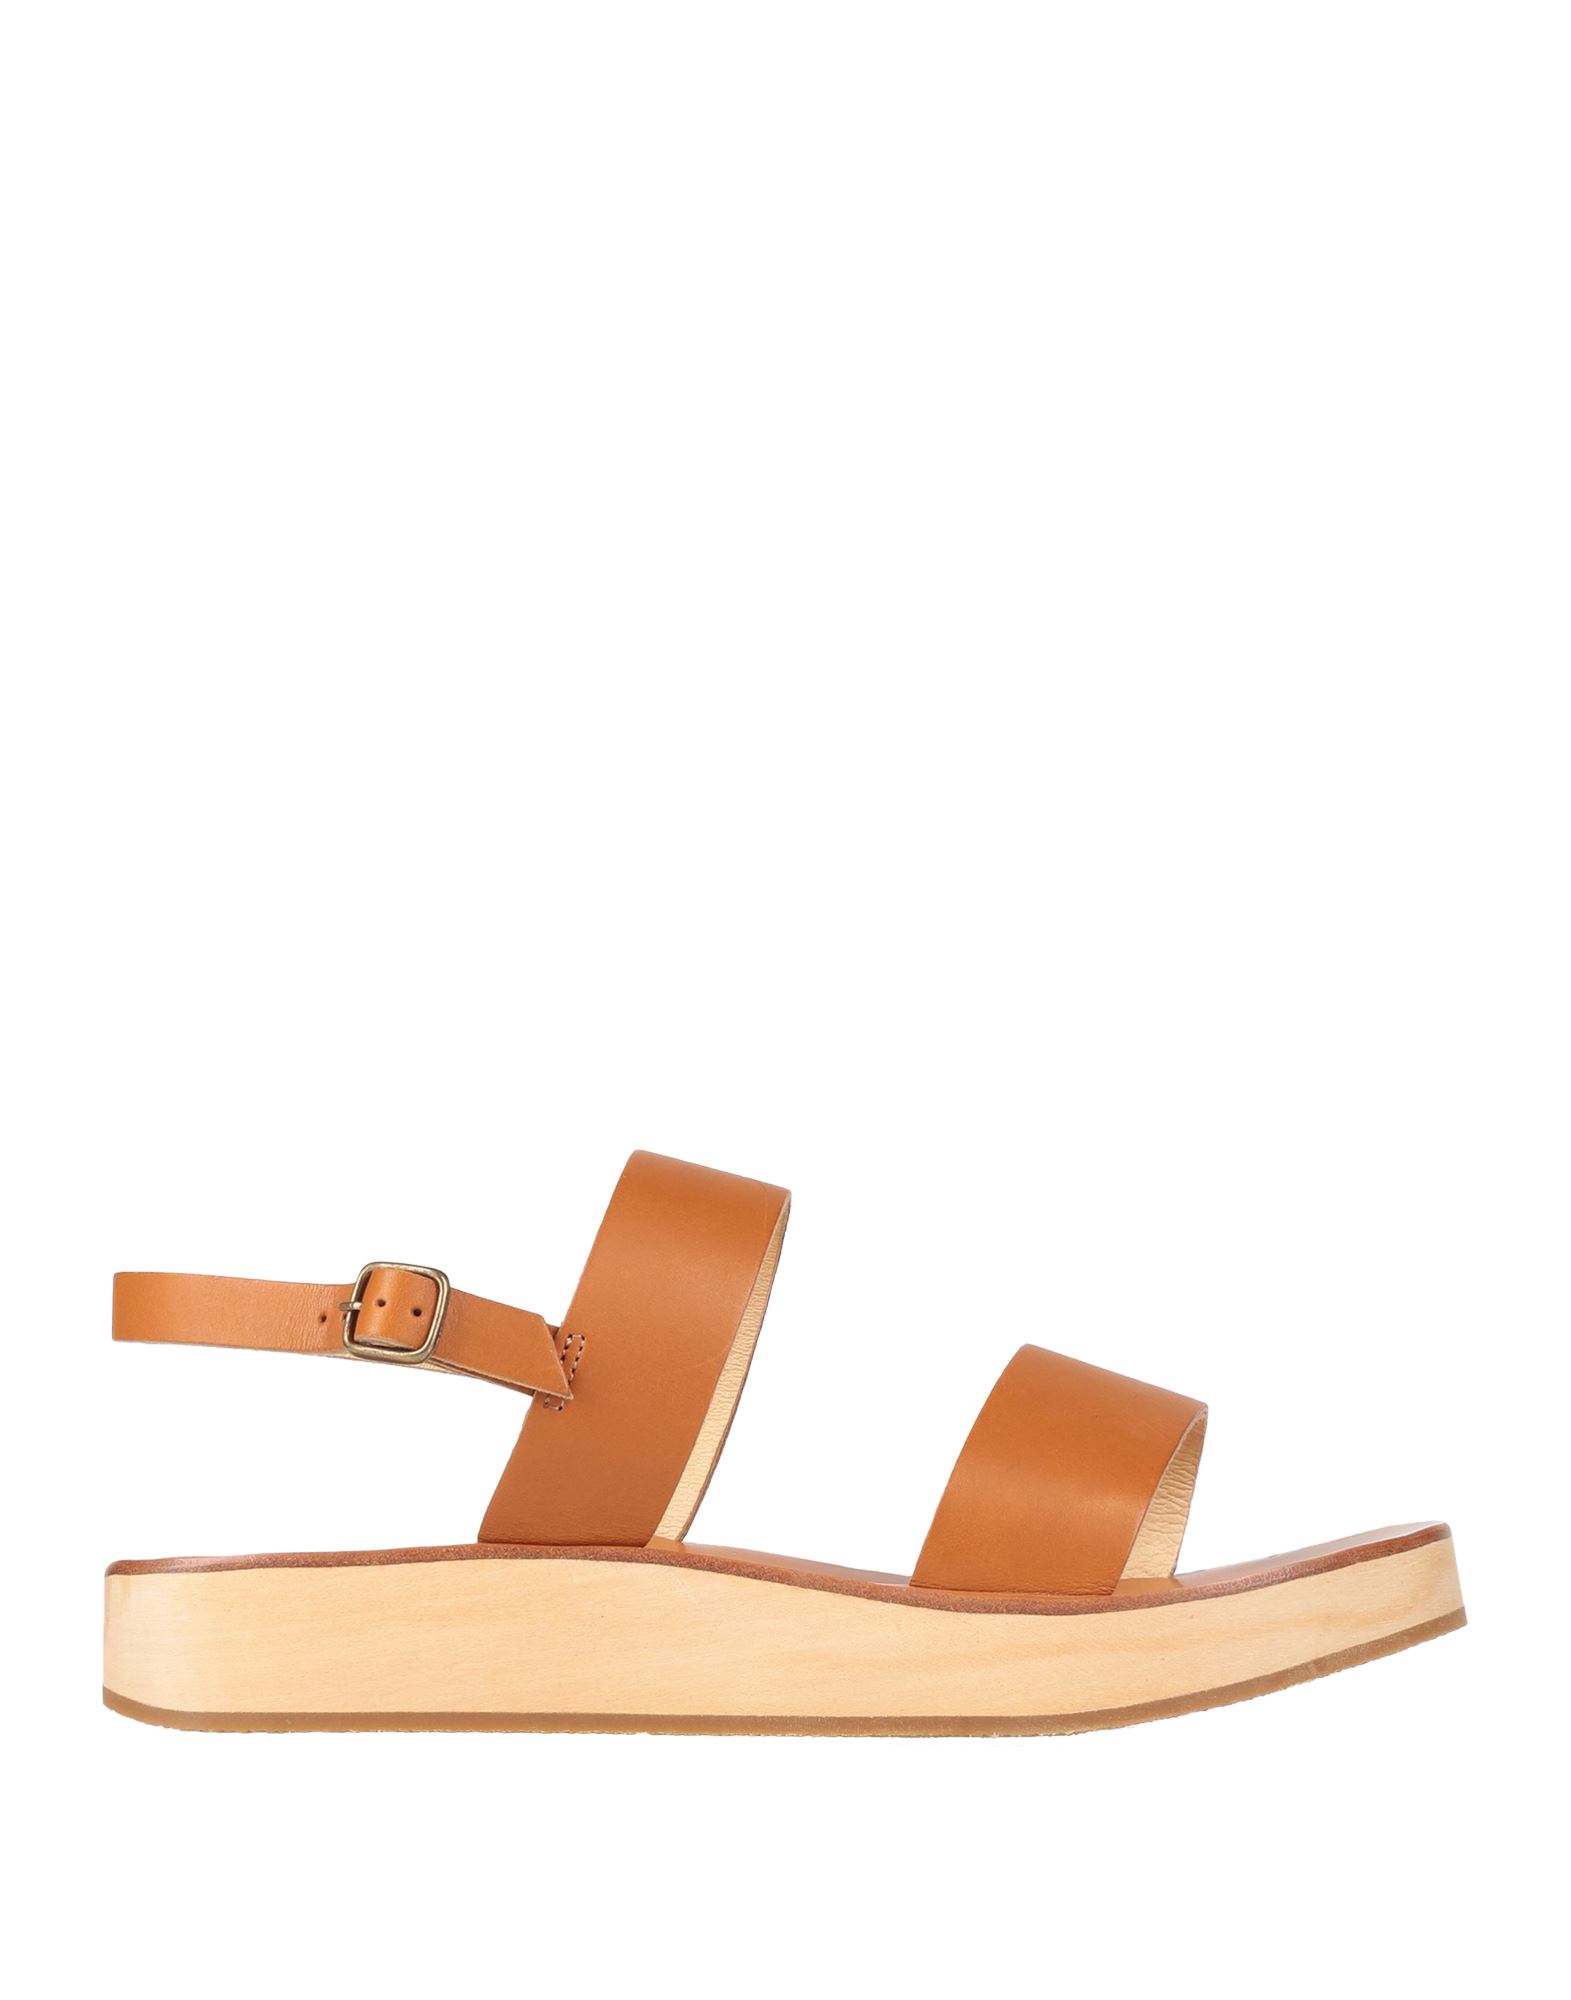 K.jacques Sandals In Tan